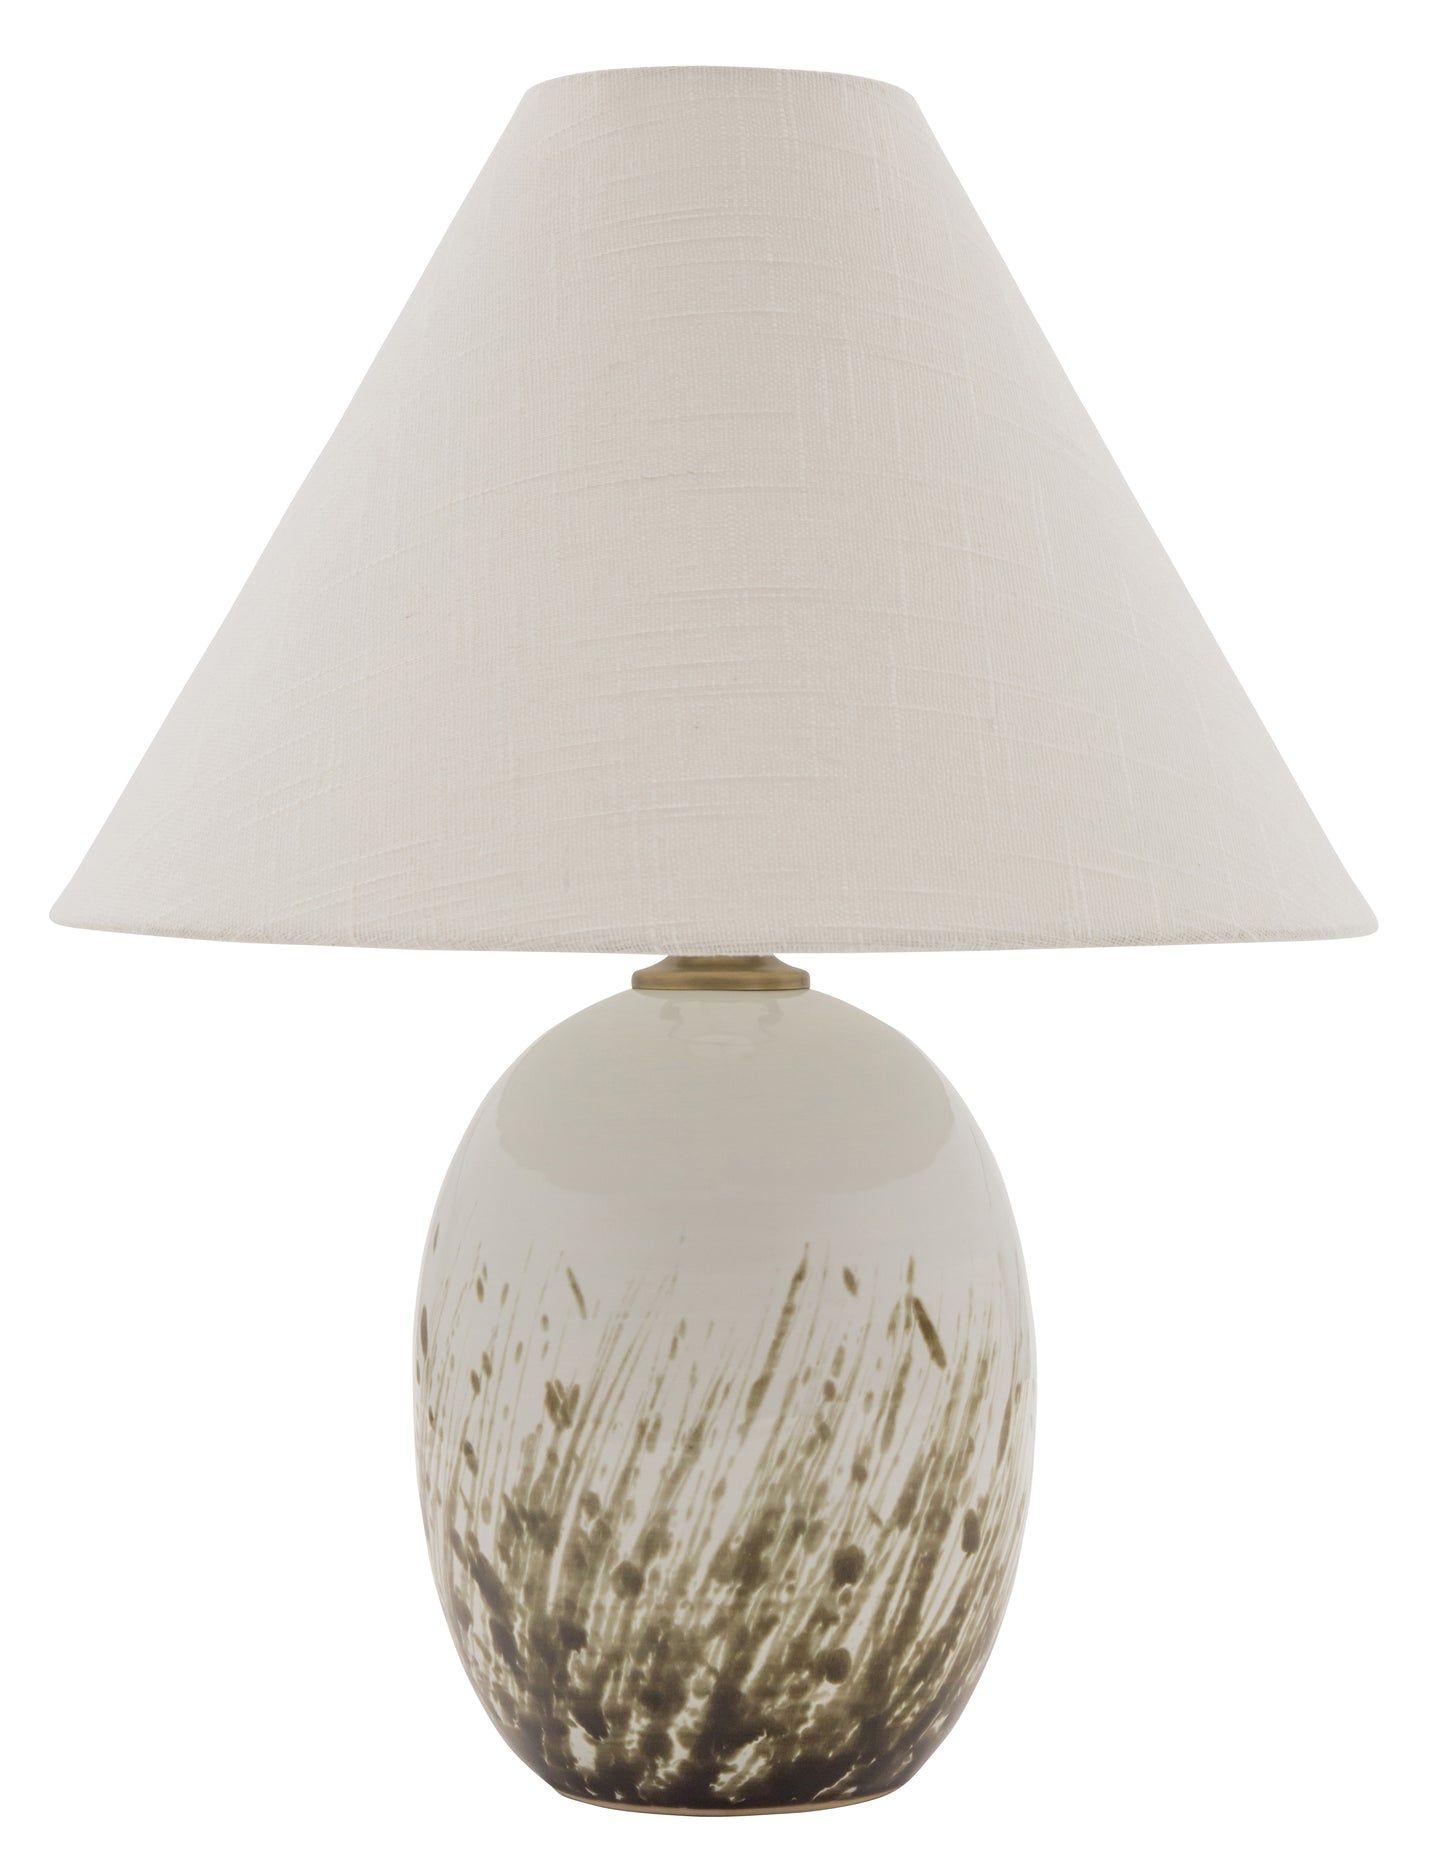 House of Troy Scatchard 22.5" Stoneware Table Lamp Decorated White Gloss GS140-DWG